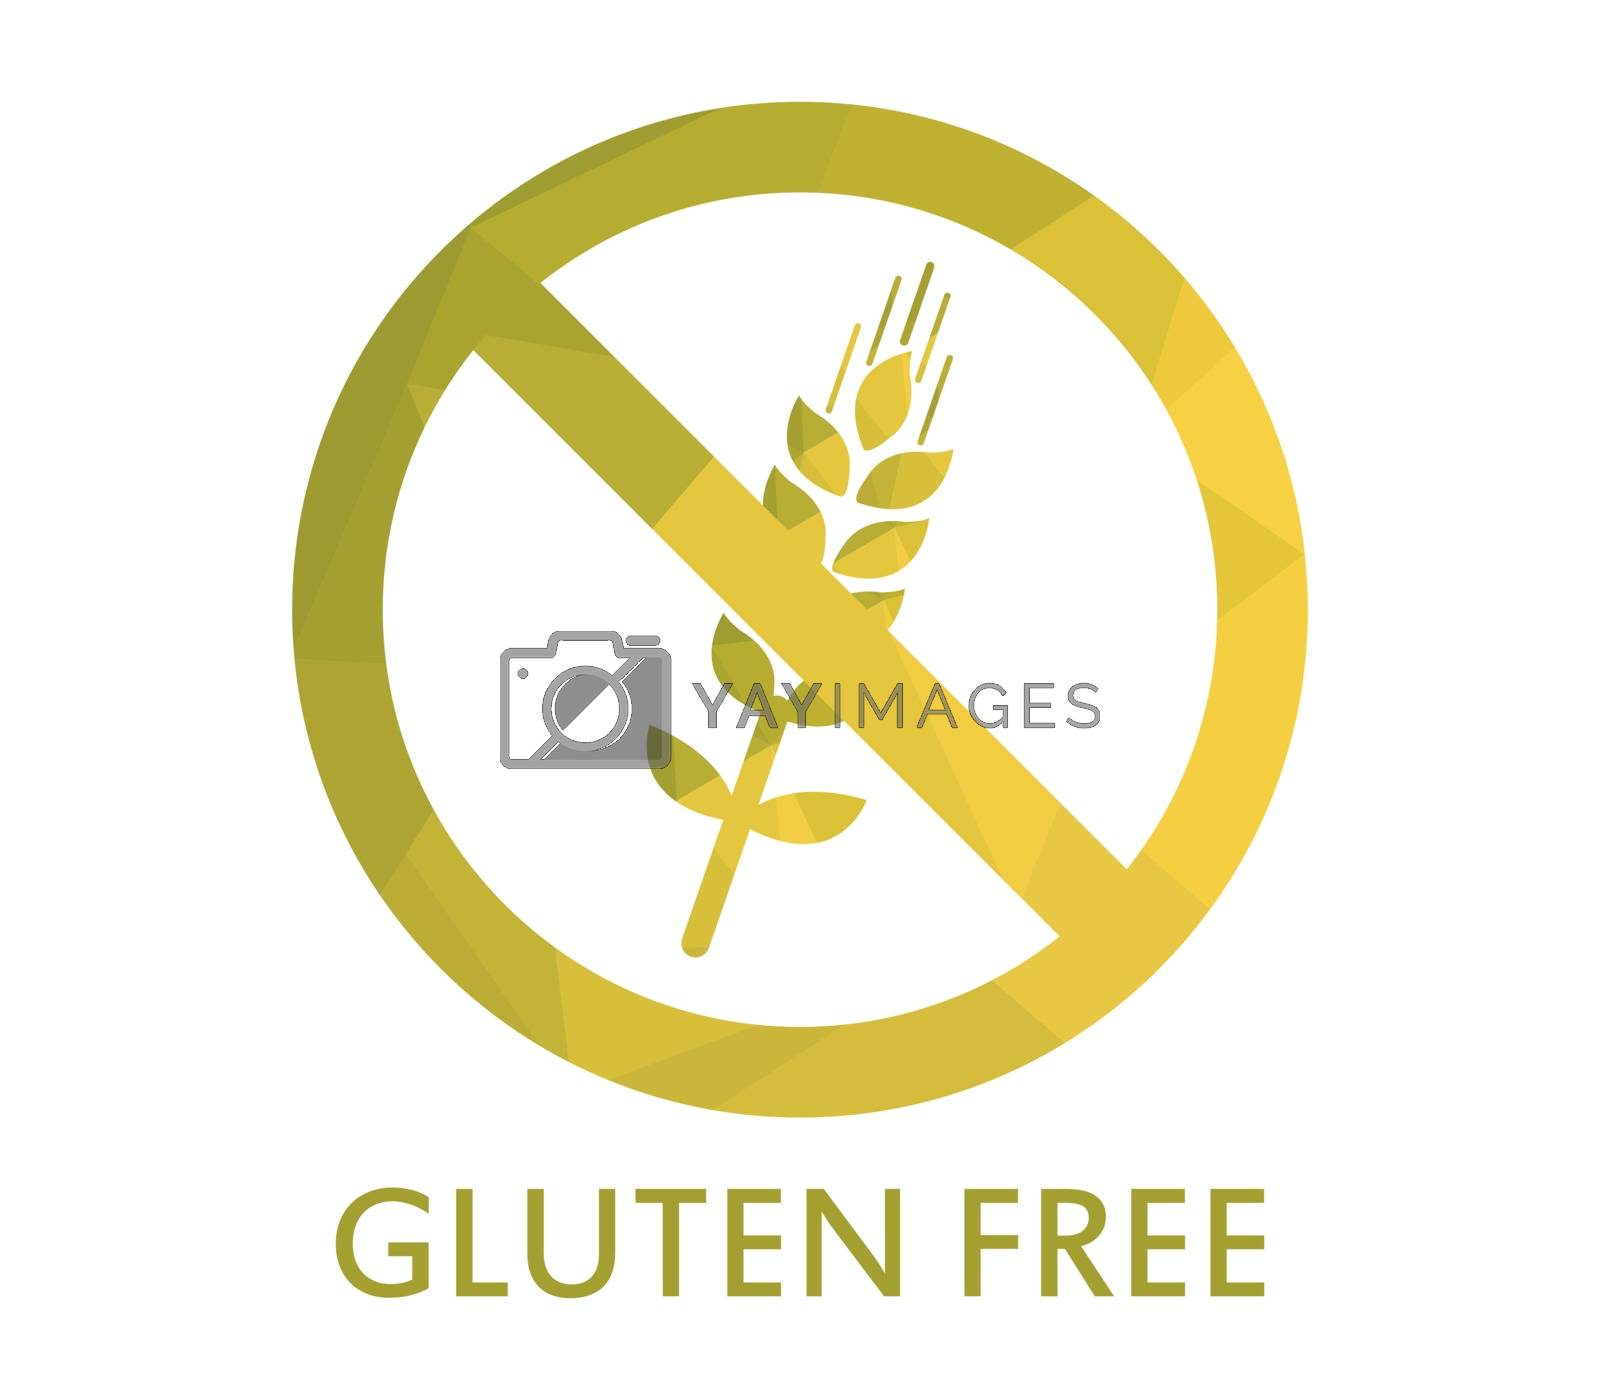 Royalty free image of gluten free by Mark1987